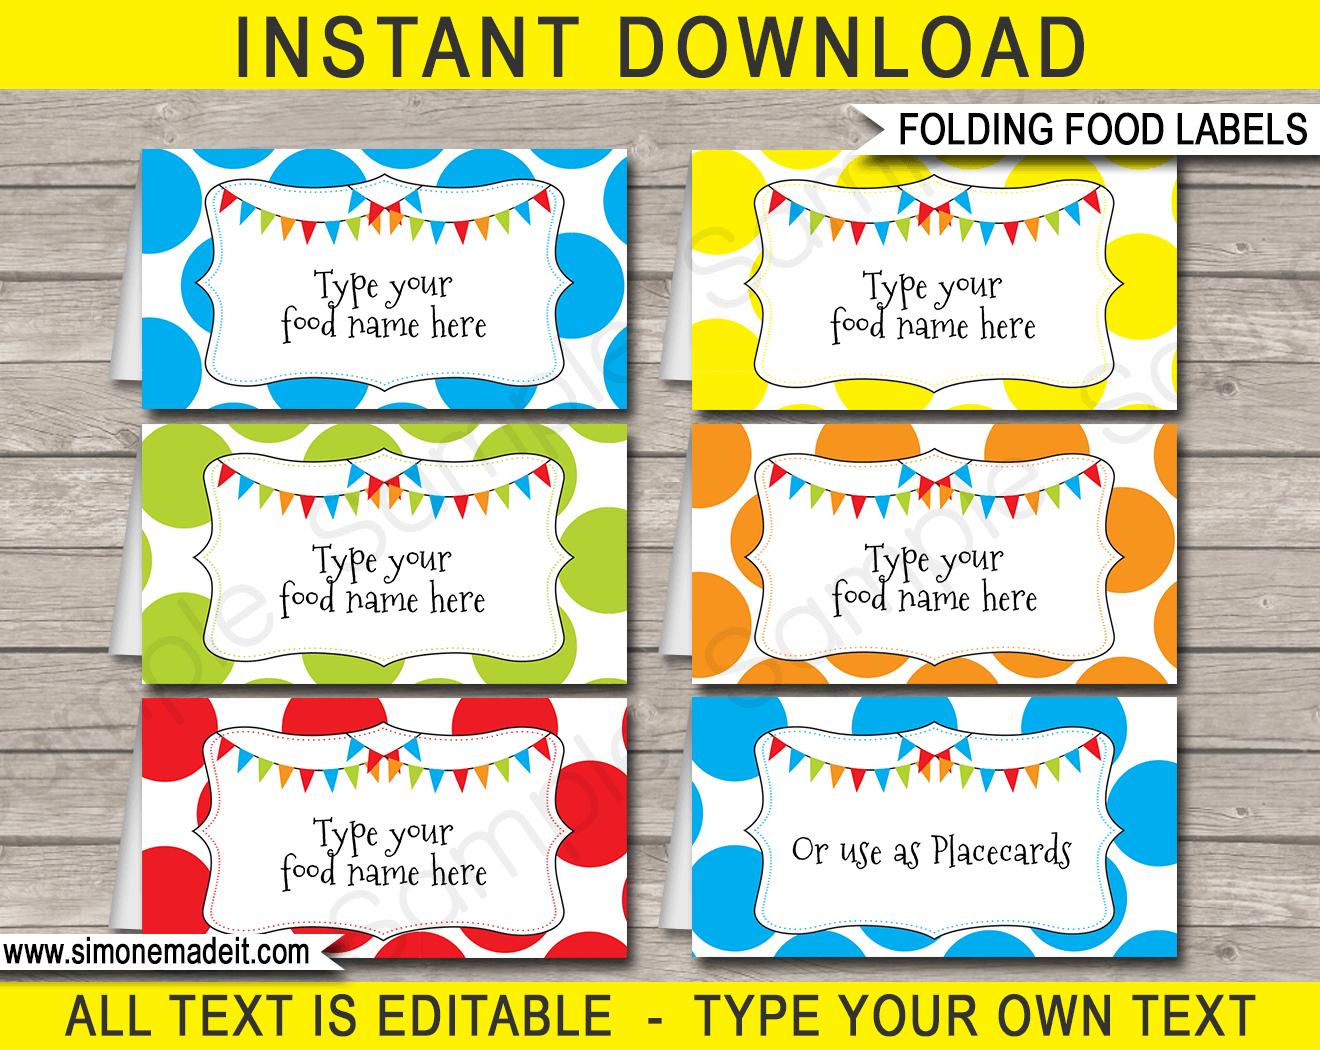 Polkadot Food Labels | Food Buffet Tags | Place Cards | Polkadot Theme Birthday Party | Editable & Printable DIY Template | Instant Download via SIMONEmadeit.com